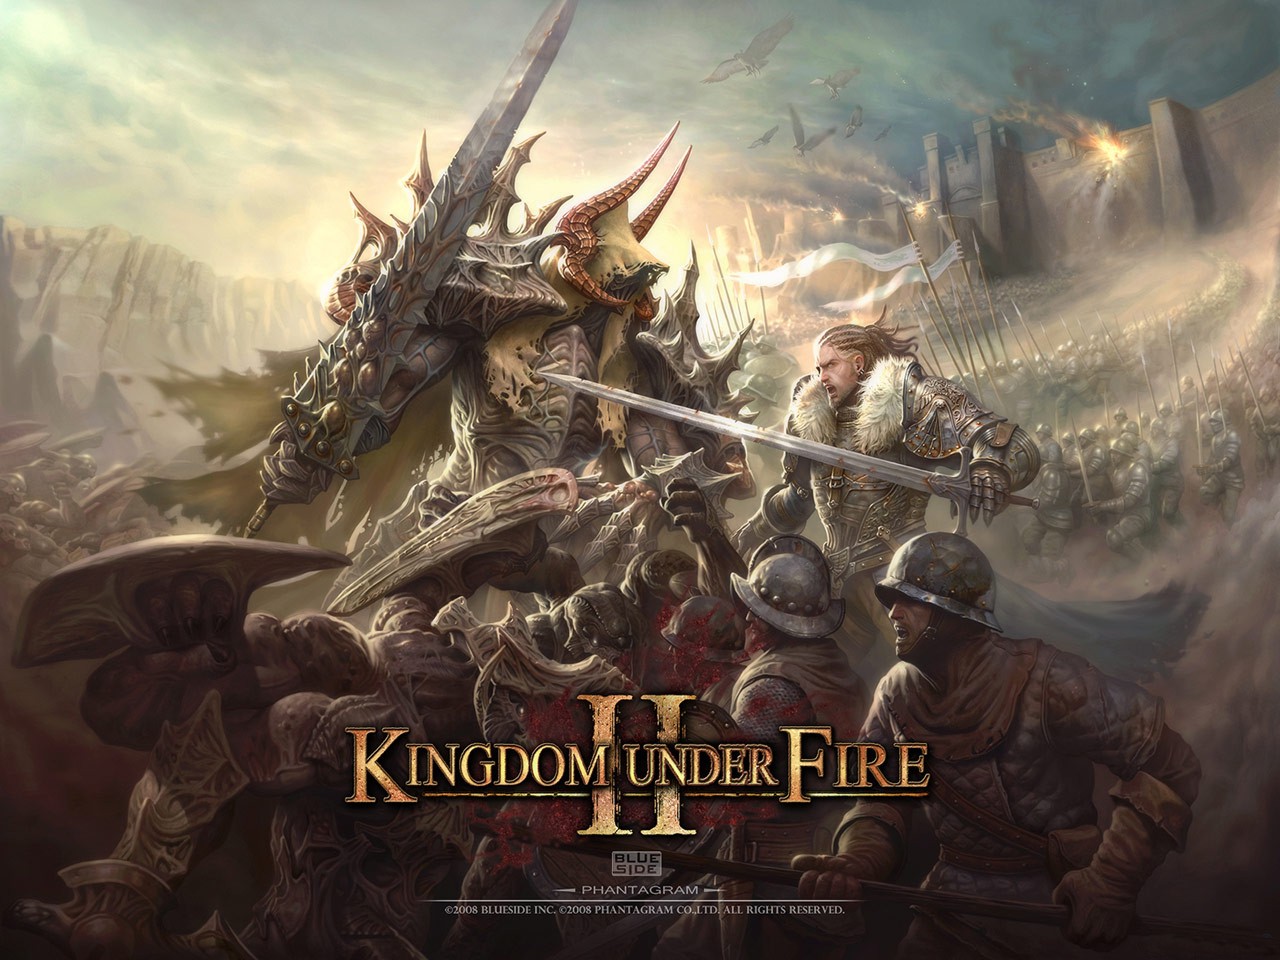 Download High quality Kingdom Under Fire 2 wallpaper / Games / 1280x960